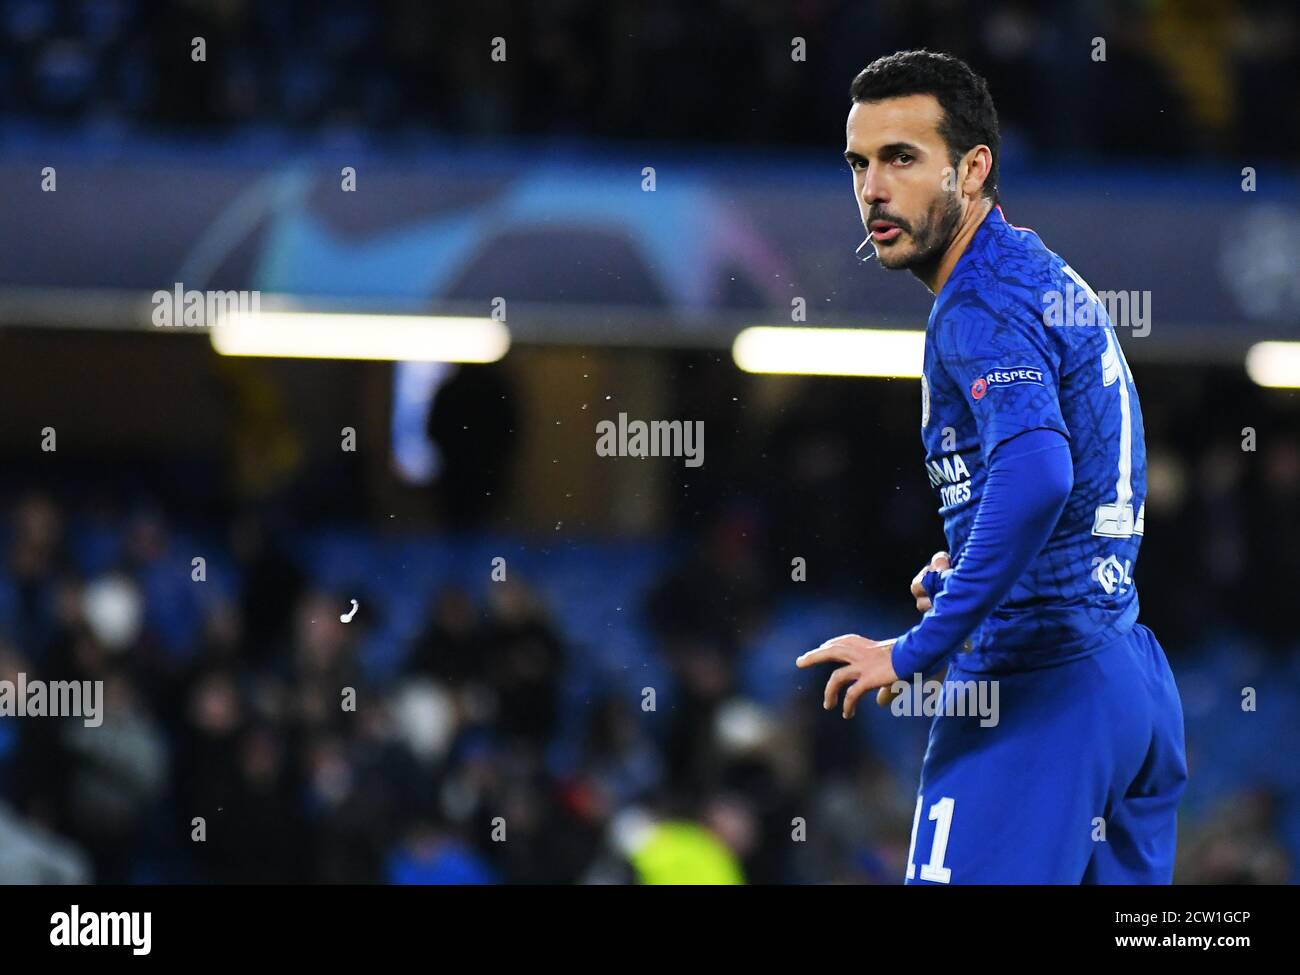 LONDON, ENGLAND - FEBRUARY 26, 2020: Pedro Eliezer Rodriguez Ledesma of Chelsea pictured during the 2019/20 UEFA Champions League Round of 16 game between Chelsea FC and Bayern Munich at Stamford Bridge. Stock Photo